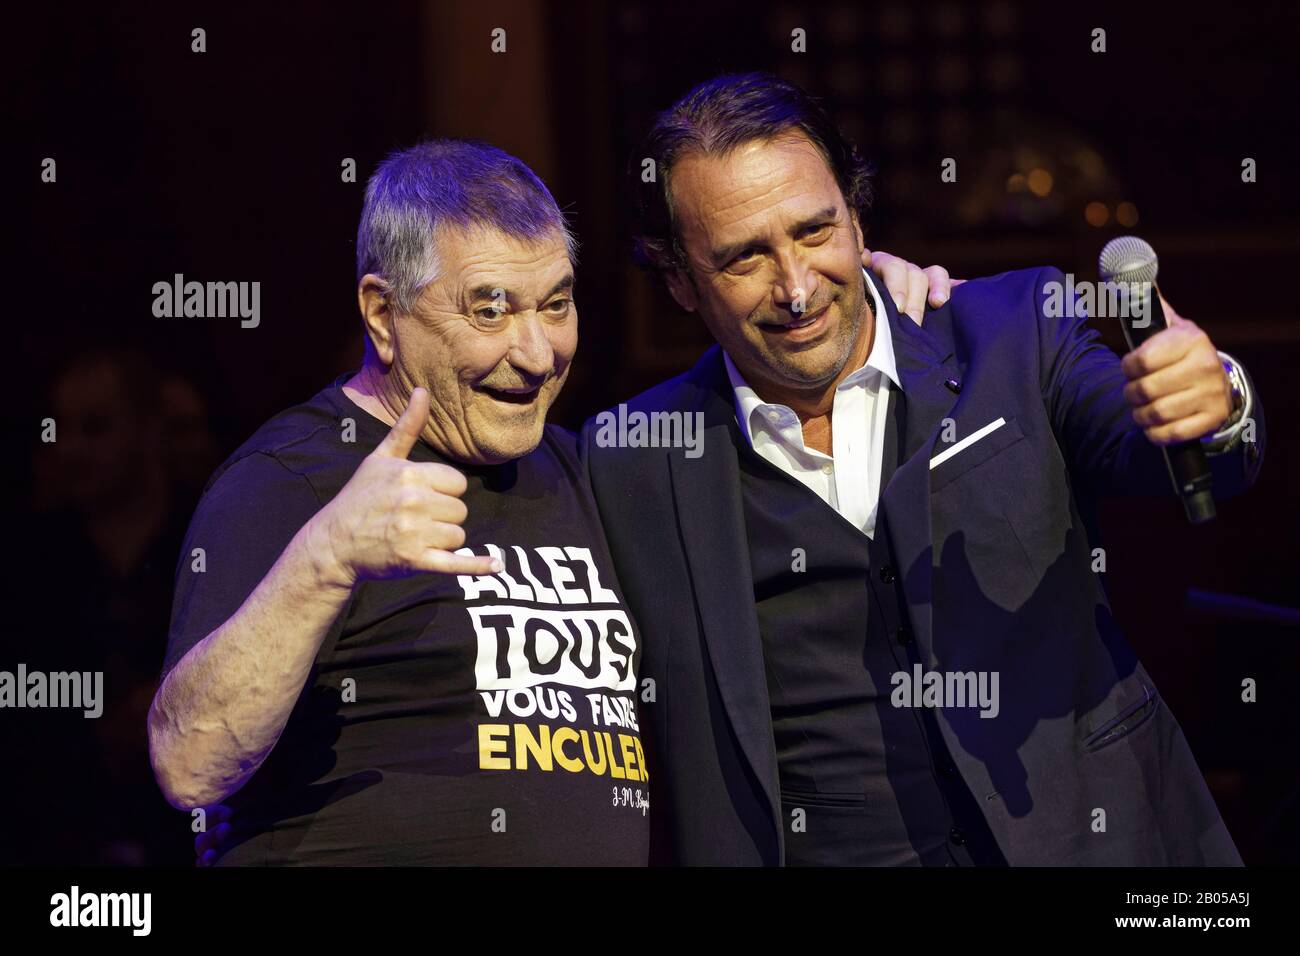 Paris, France. 17th Feb, 2020. Comedian Jean Marie Bigard and singer Sebastien El Chato attend Marcel Campion's 80th Birthday Party at Cirque d'Hiver Stock Photo